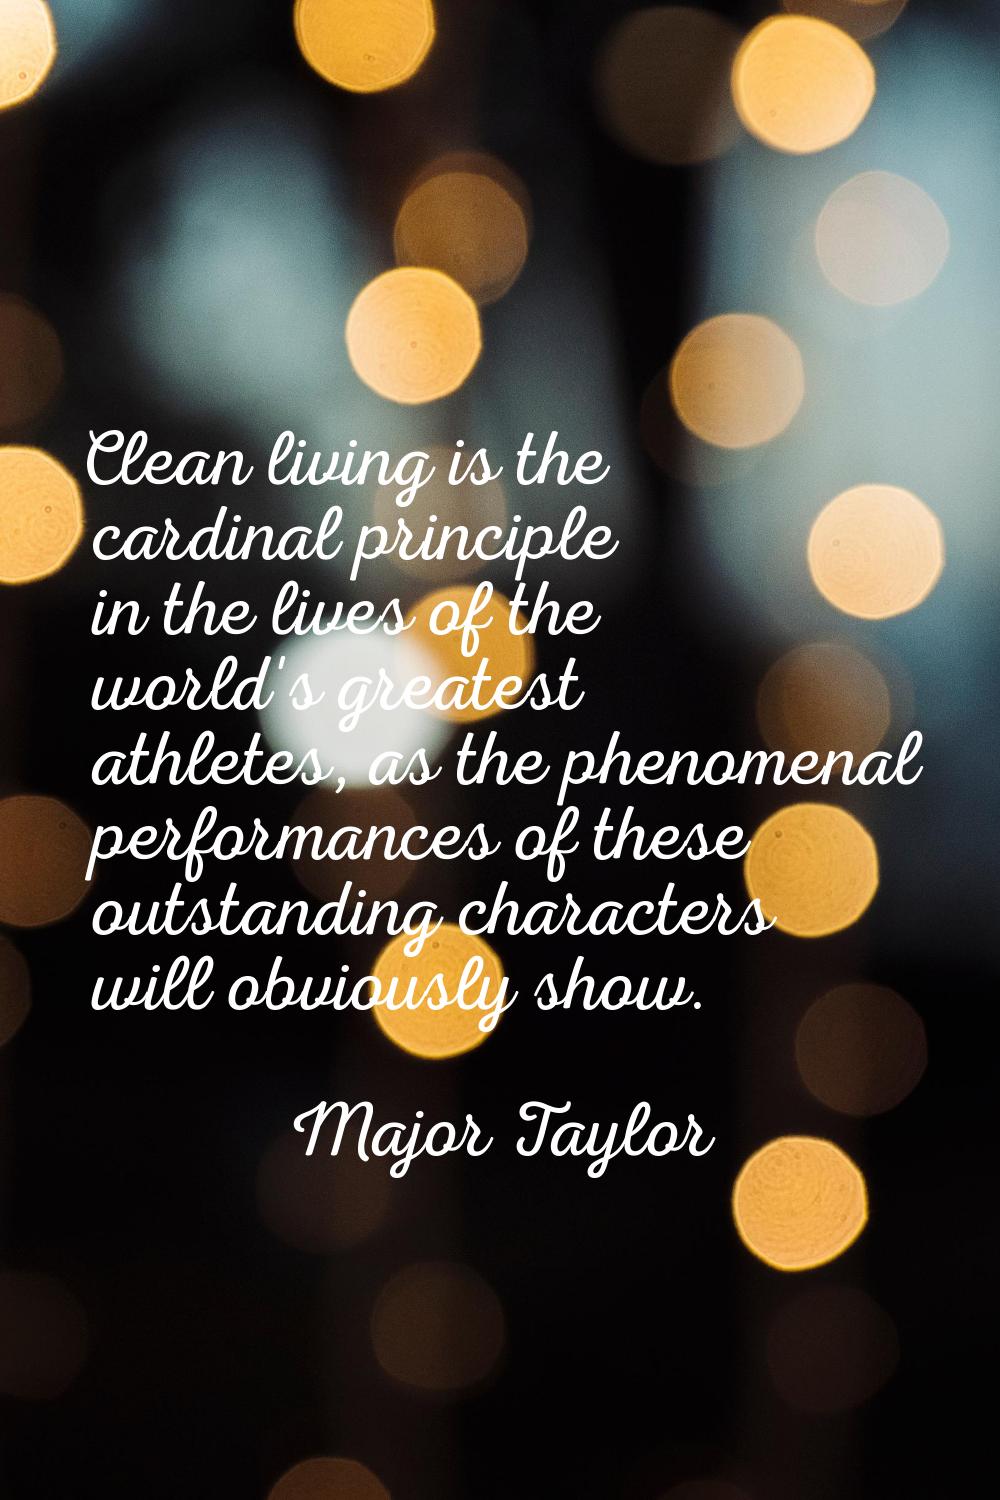 Clean living is the cardinal principle in the lives of the world's greatest athletes, as the phenom